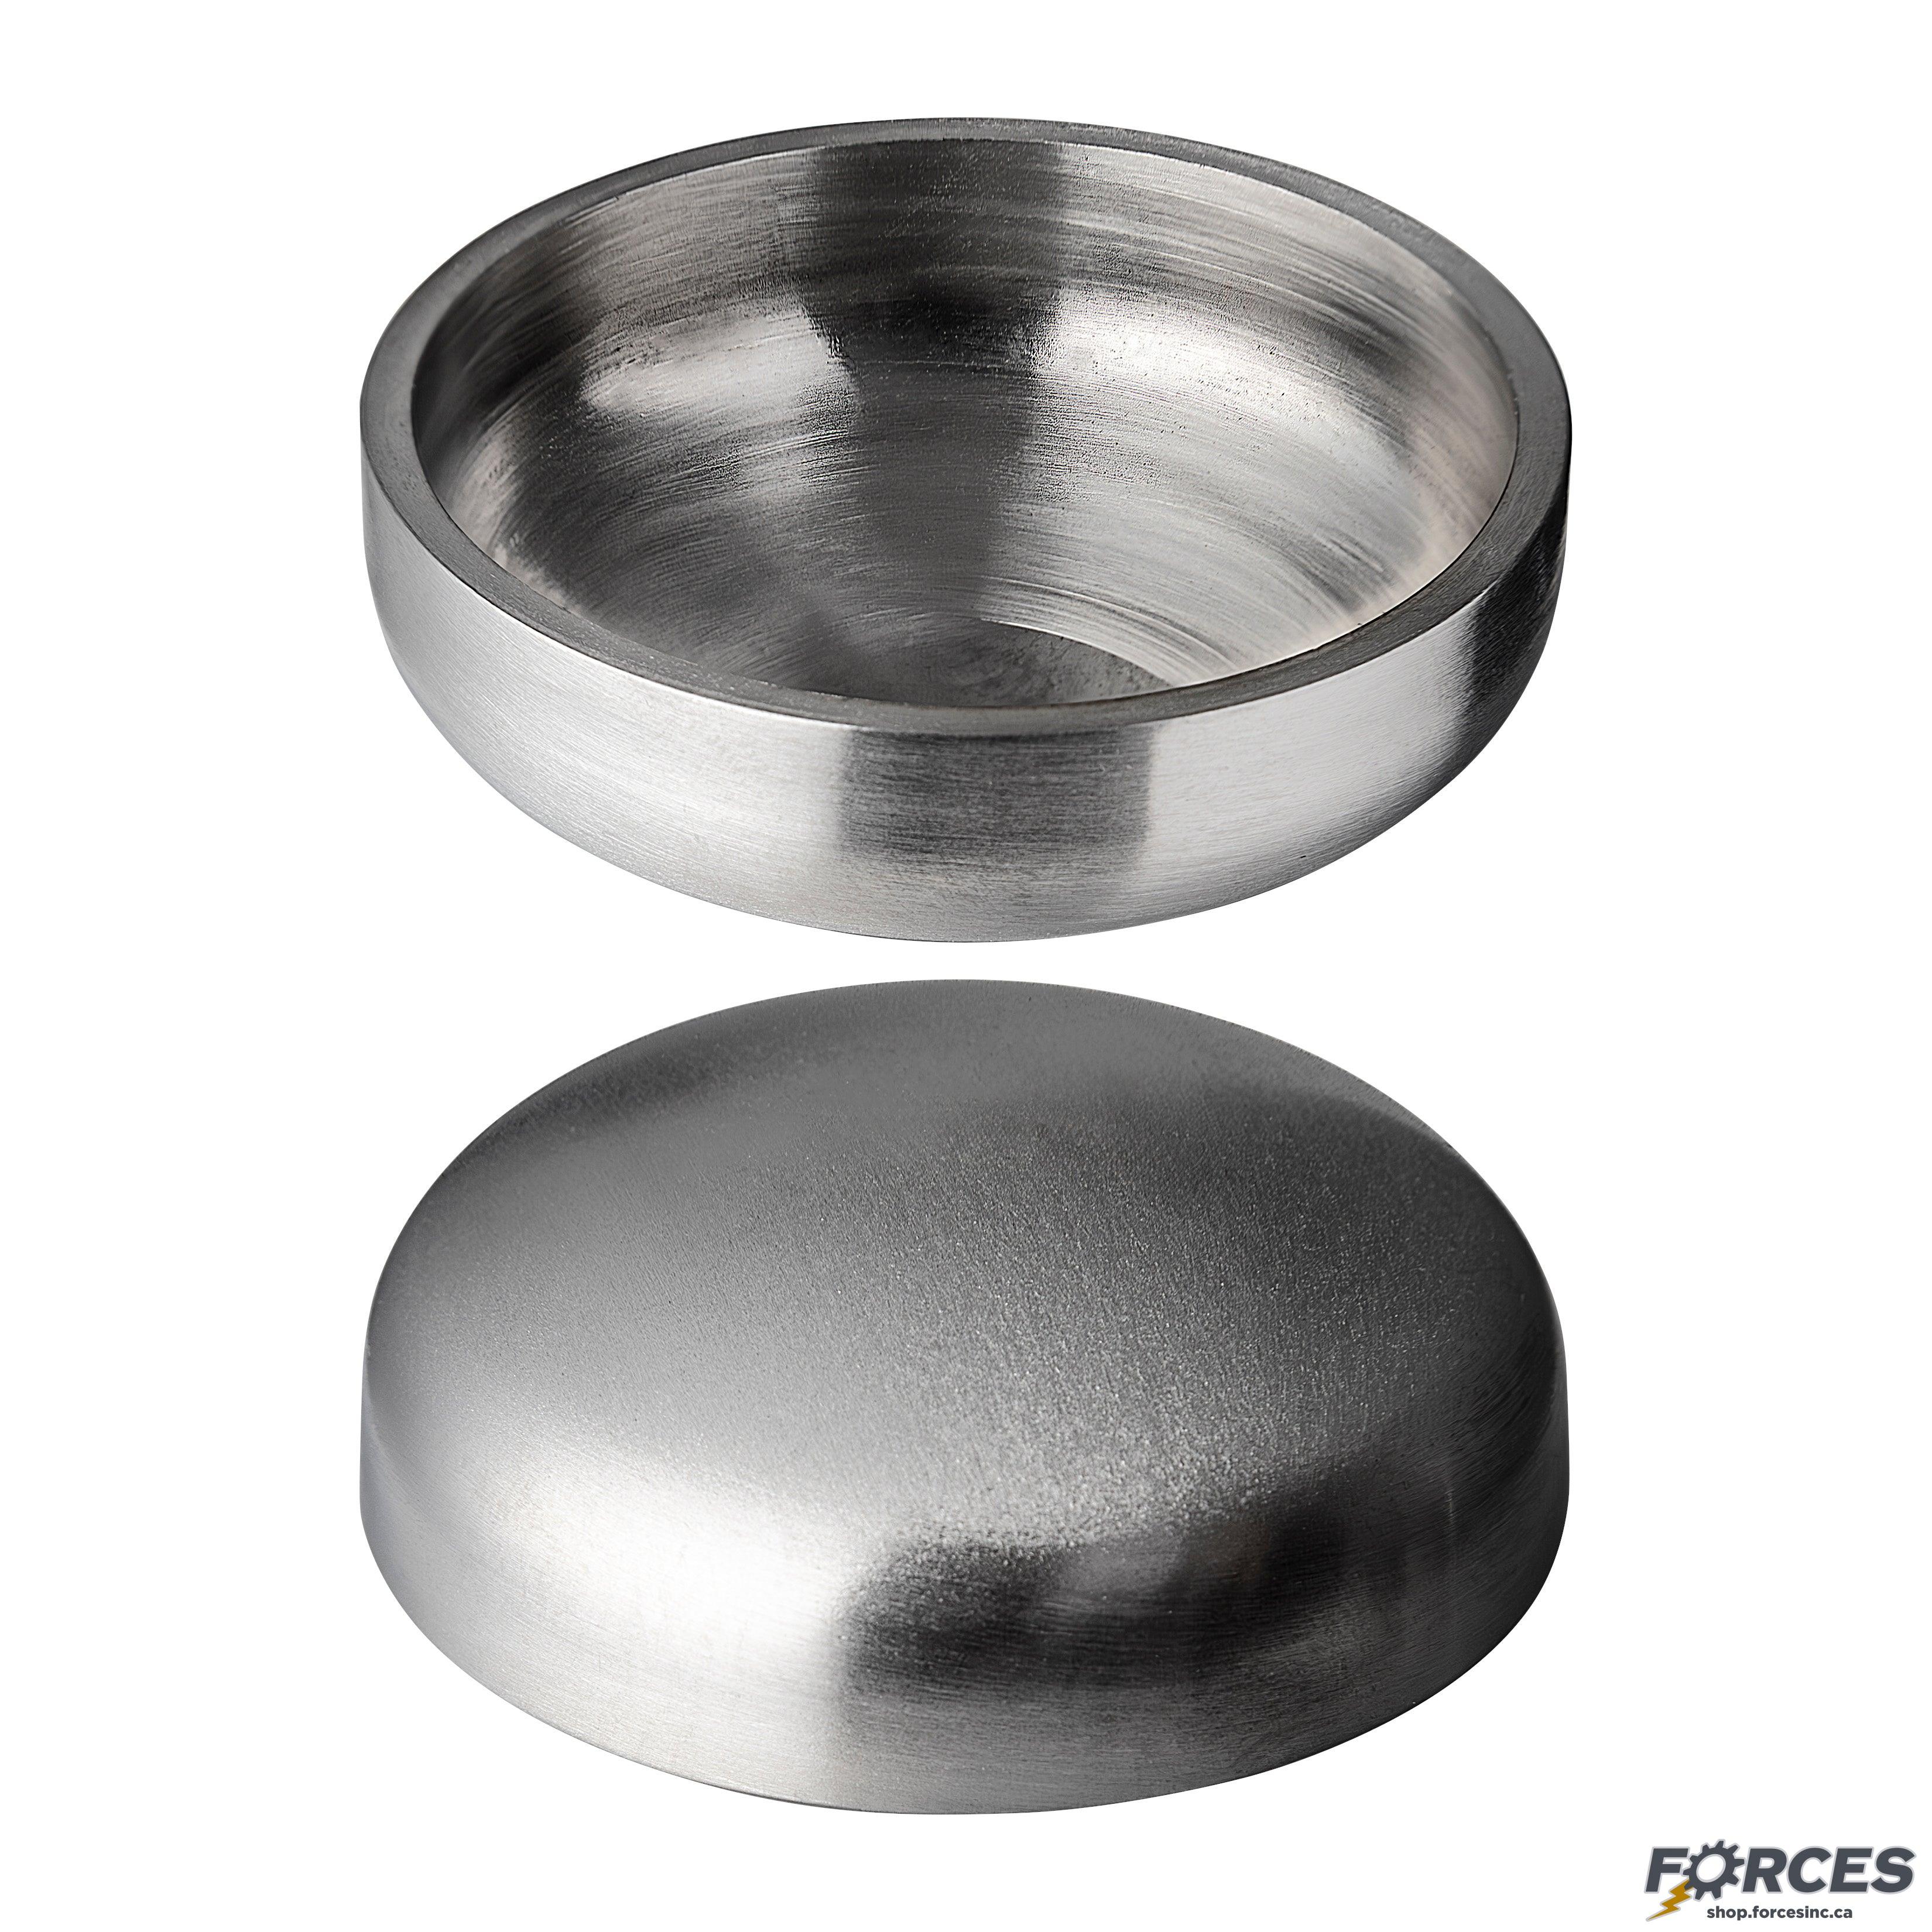 2" Butt Weld End Cap 16W - Stainless Steel 316 - Forces Inc